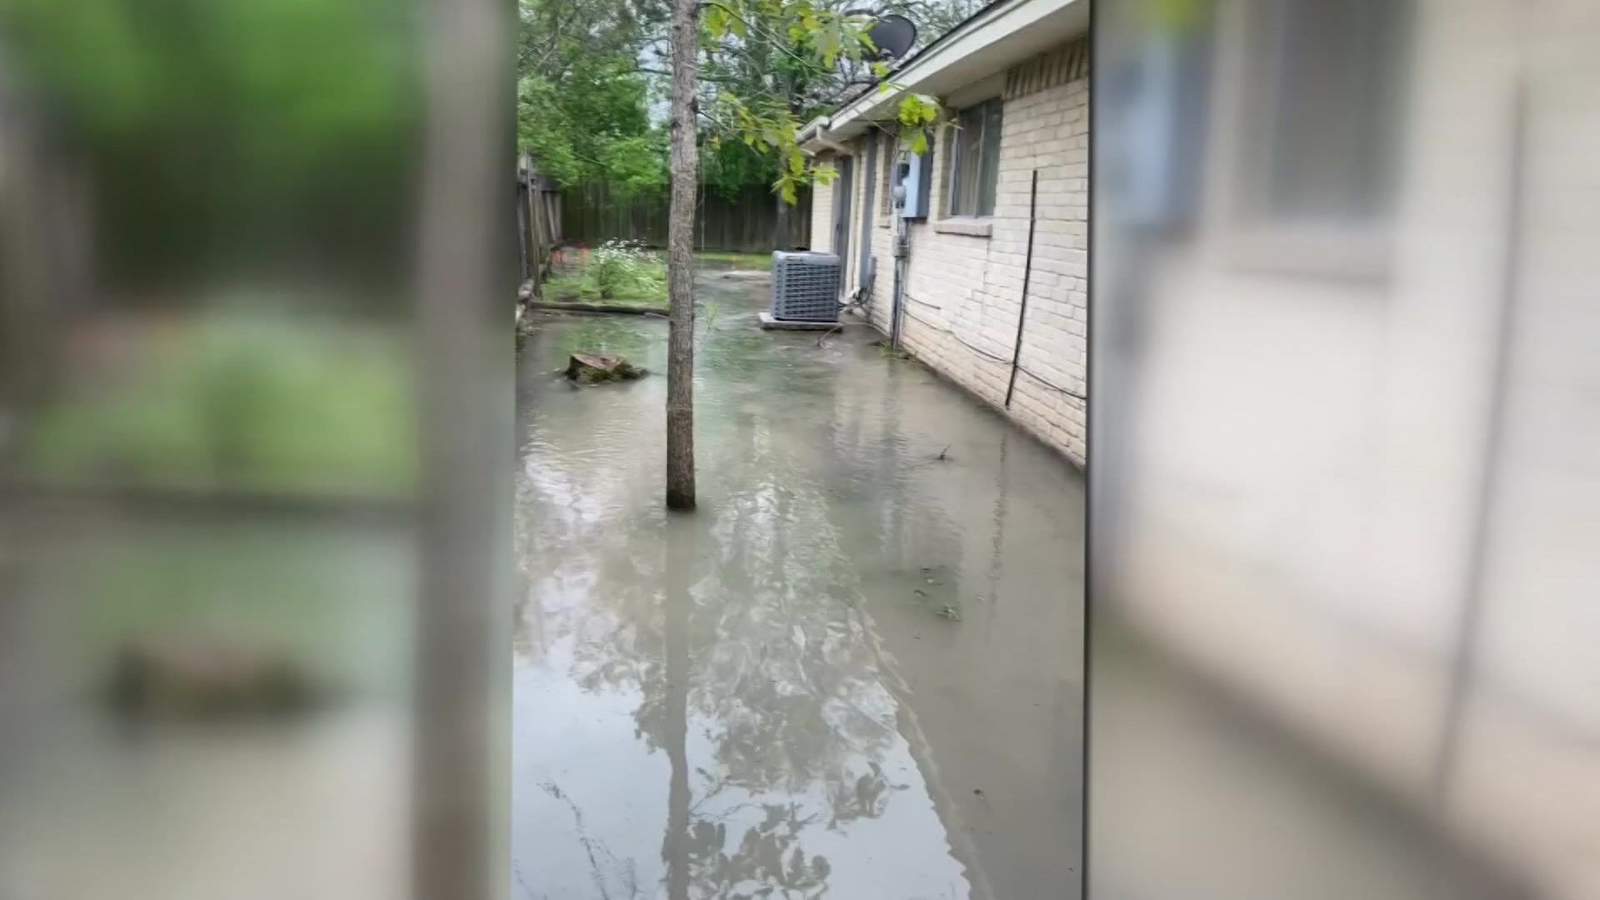 Spring woman left with broken pipes, water damage in home after contractor hit water line